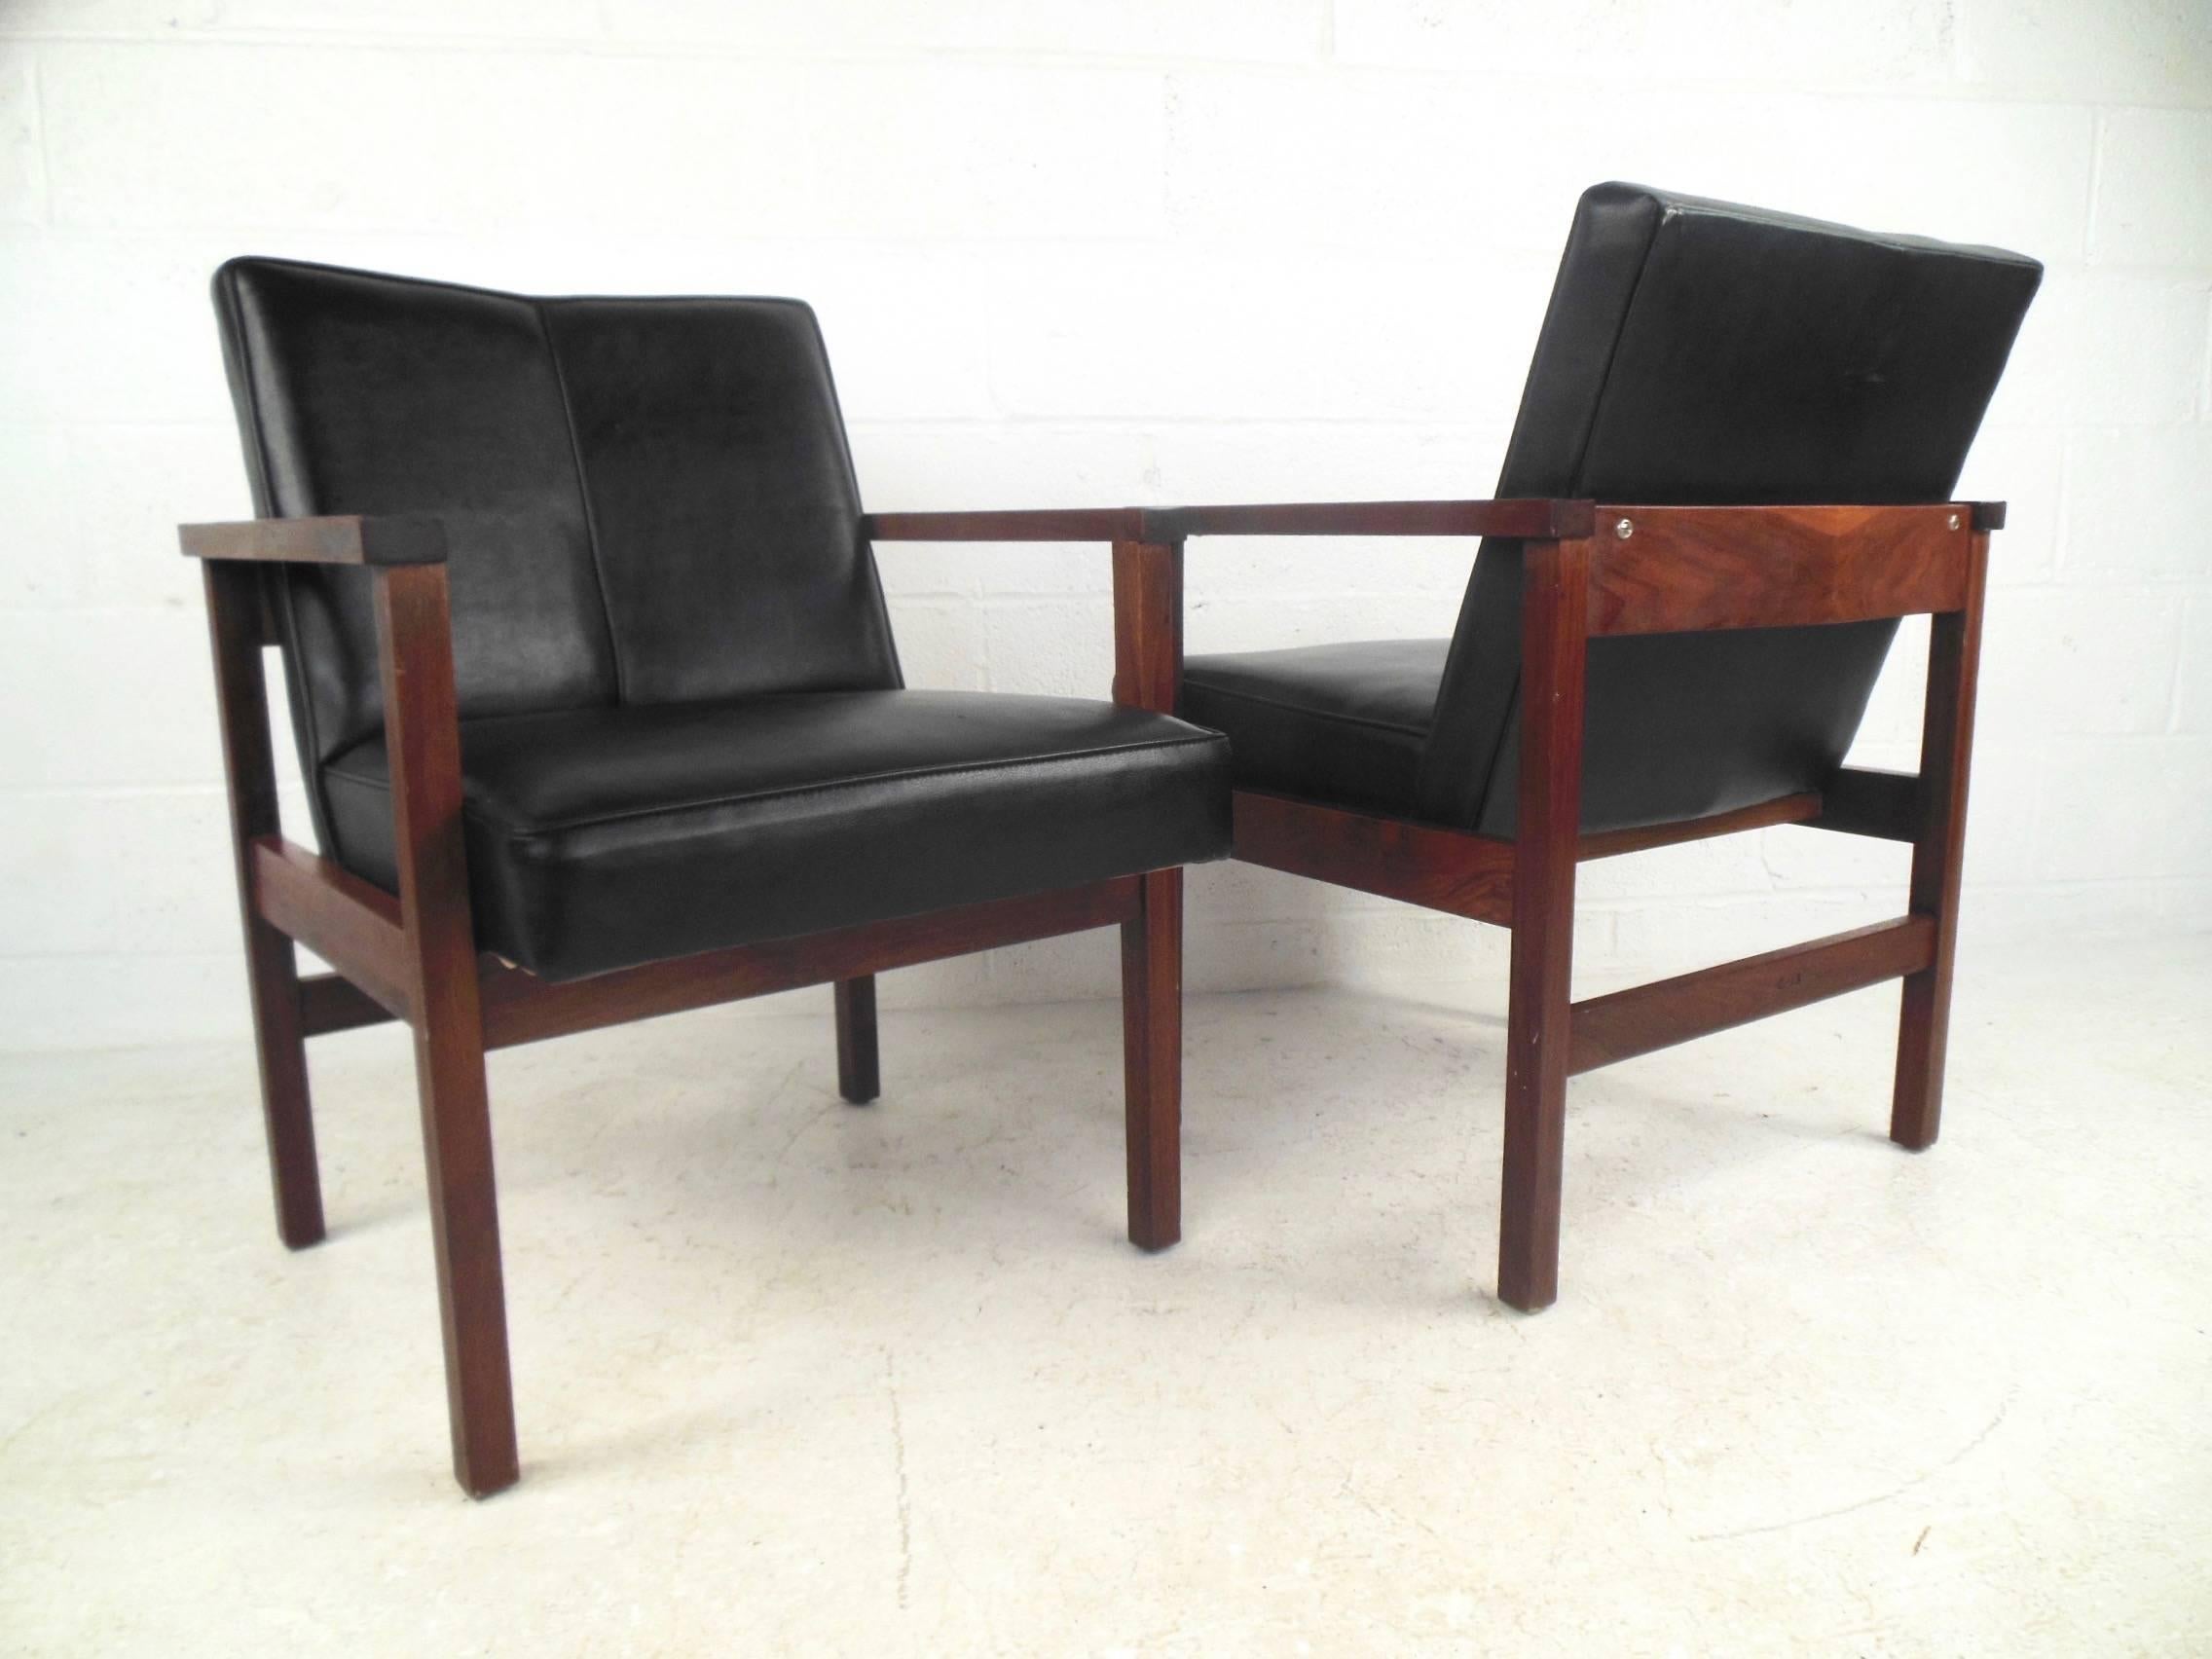 This stunning pair of vintage armchairs feature's sturdy walnut frames with uniquely angled vinyl seat backs. Stylish pair of side chairs by Monarch Furniture Co. make a beautiful Mid-Century Modern addition to any interior setting. Please confirm